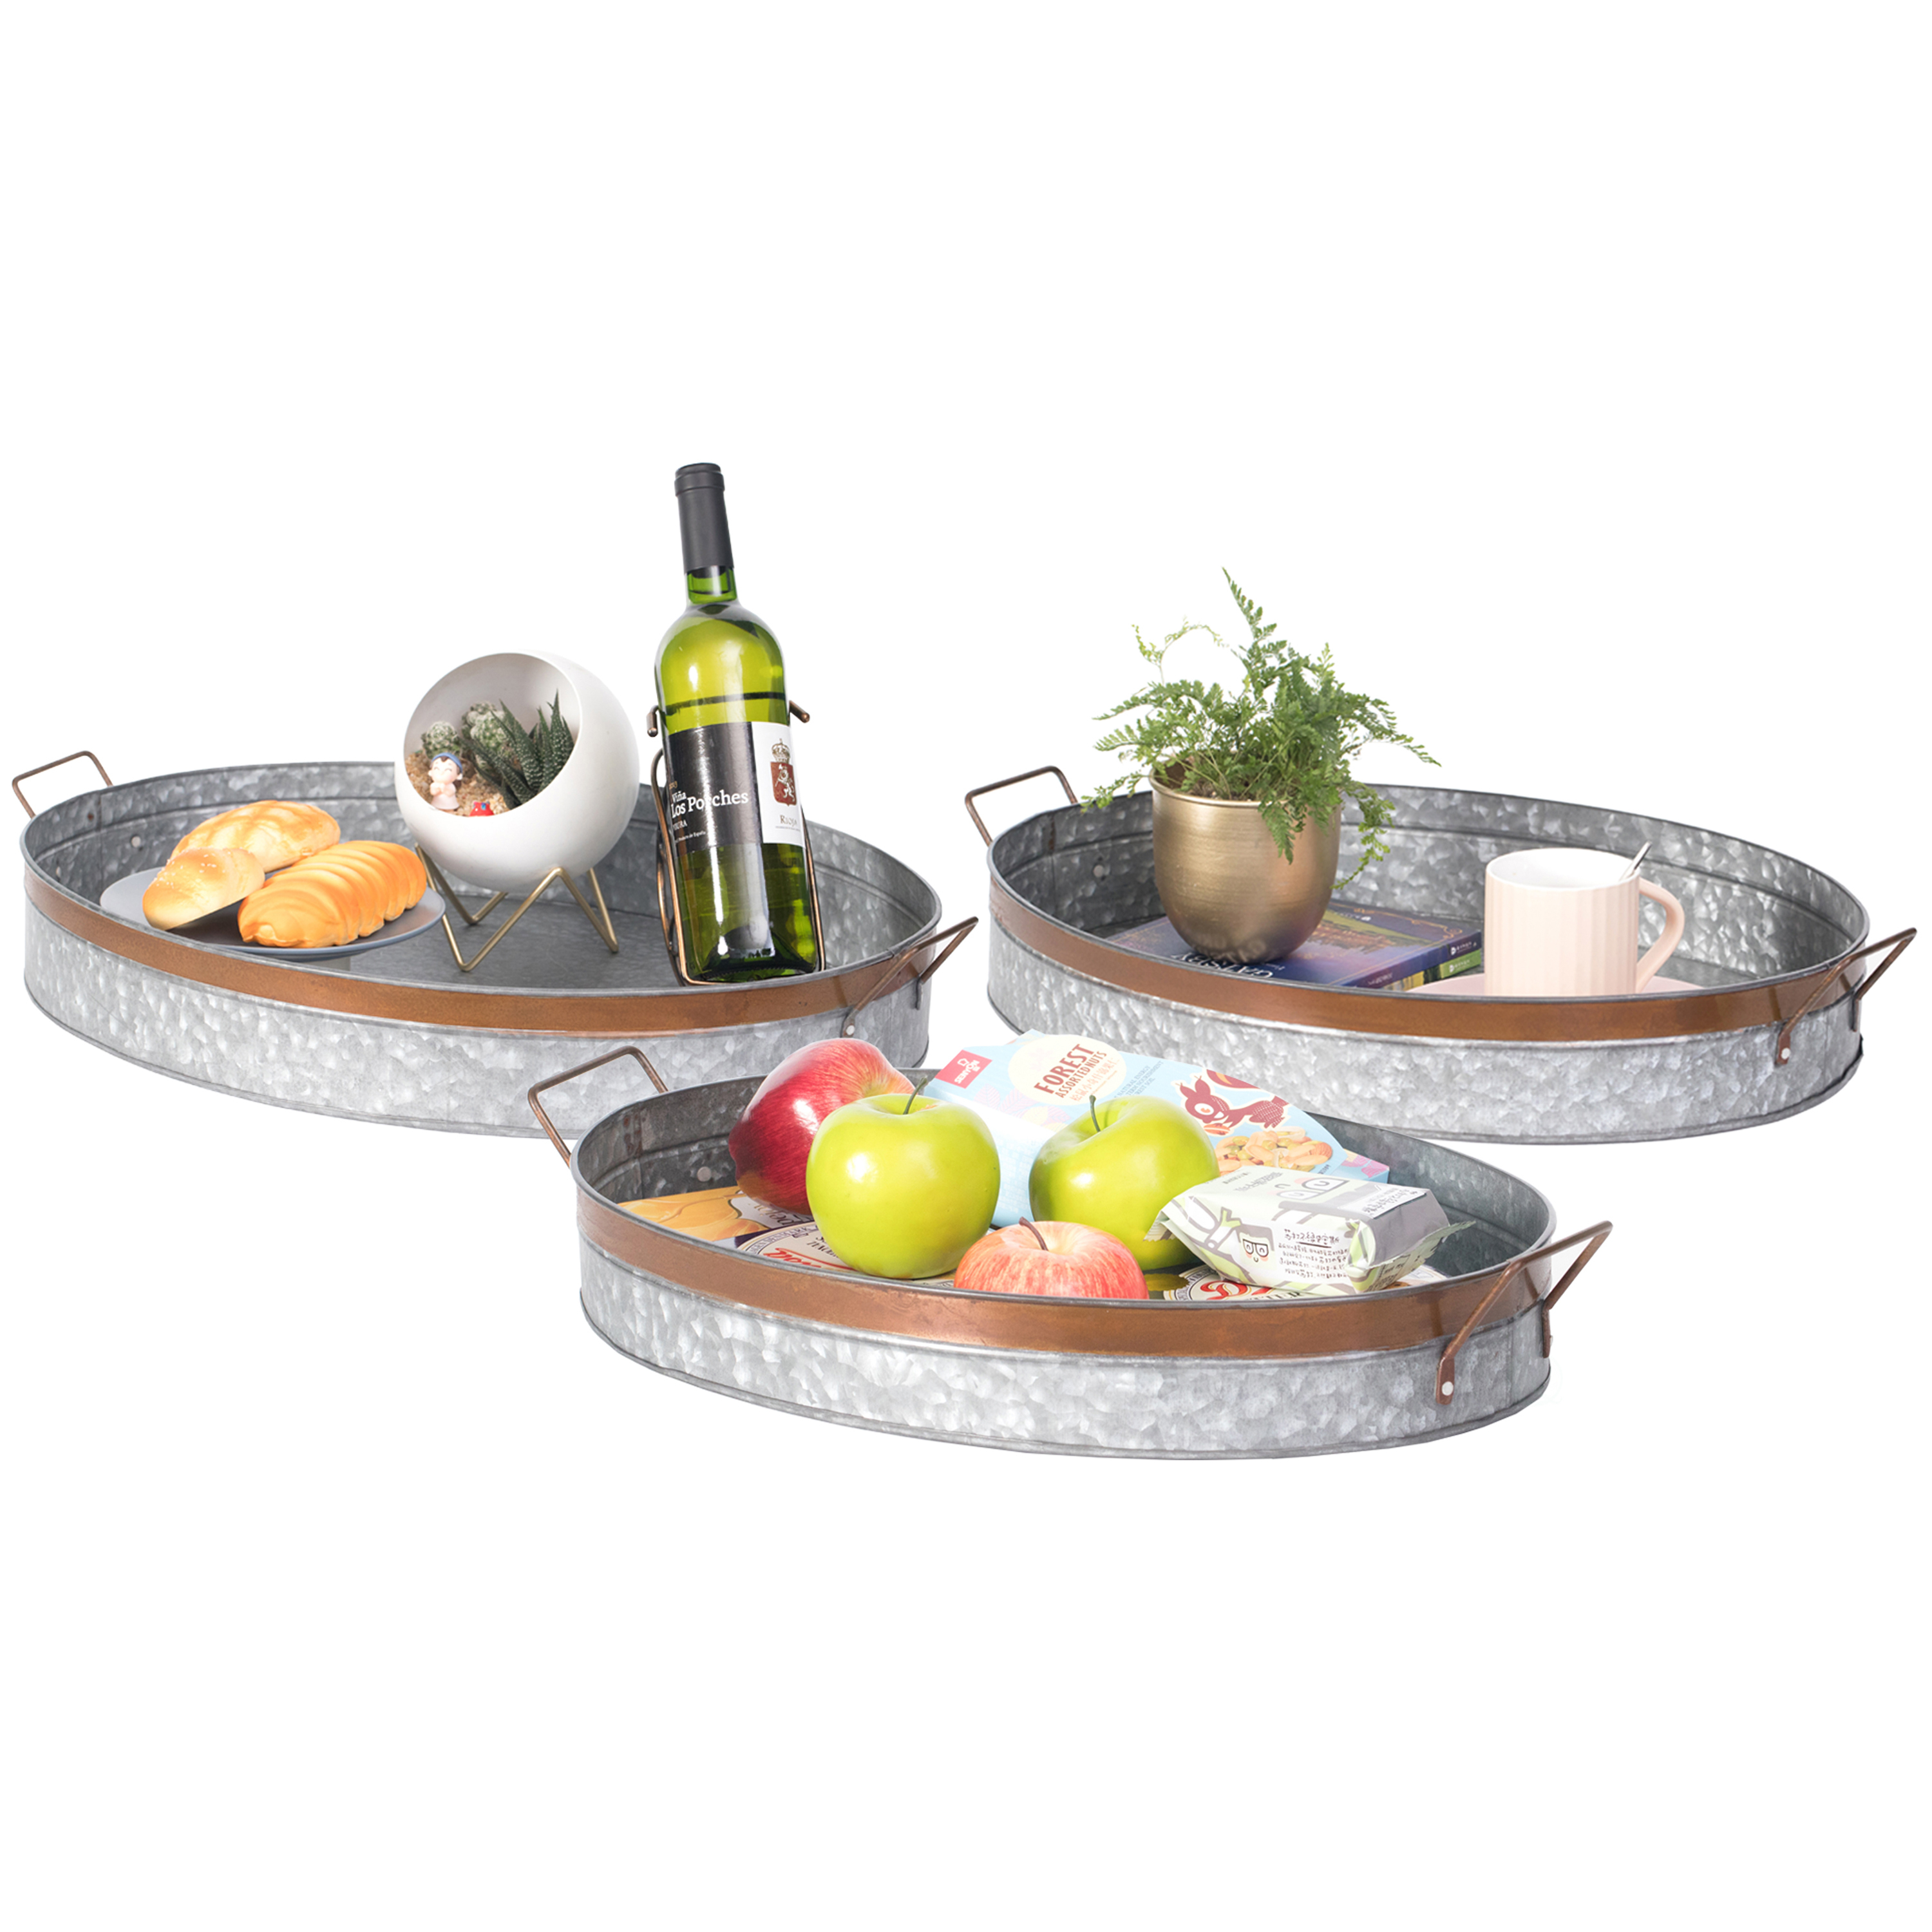 Galvanized Metal Oval Rustic Serving Tray With Handles - Small